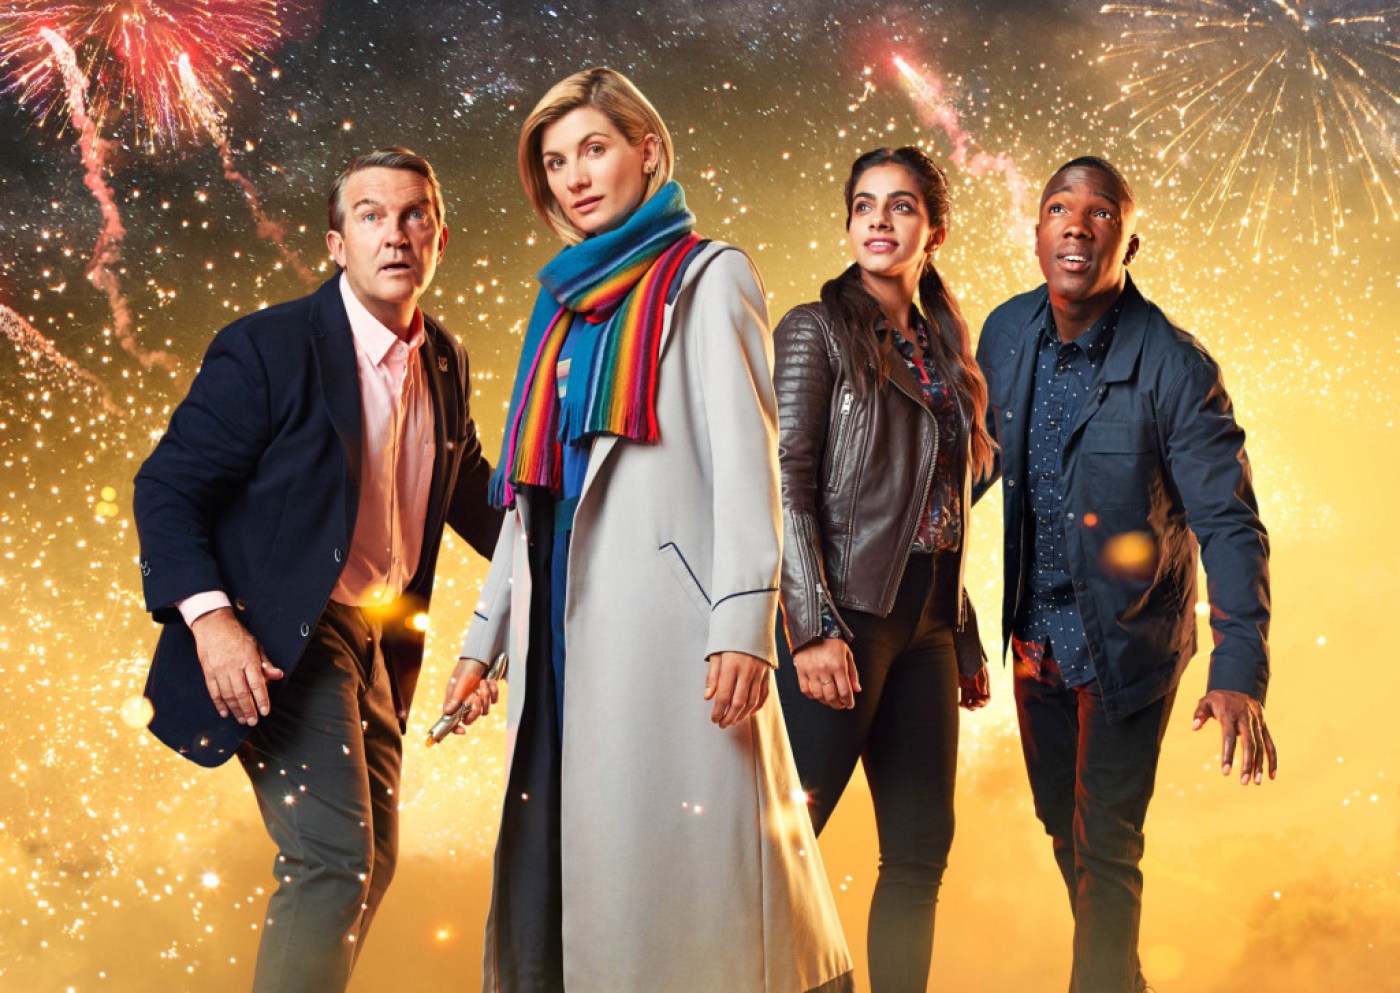 The cast of Doctor Who